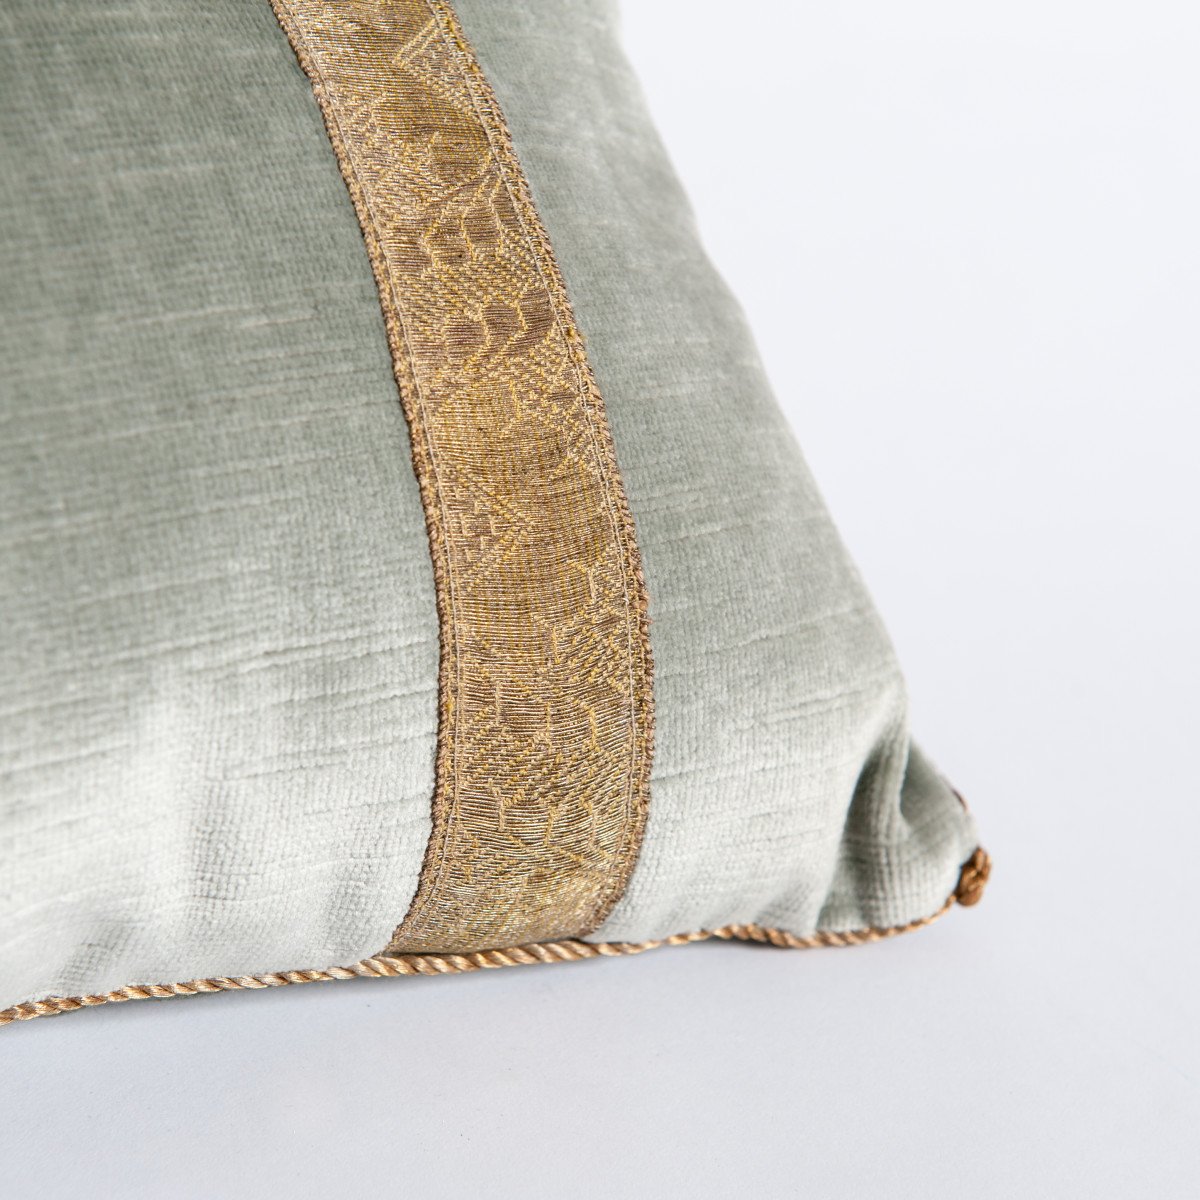 Pair Of Pastel Green Colored Velvet Pillows With Antique Metallic Embroidery -photo-2